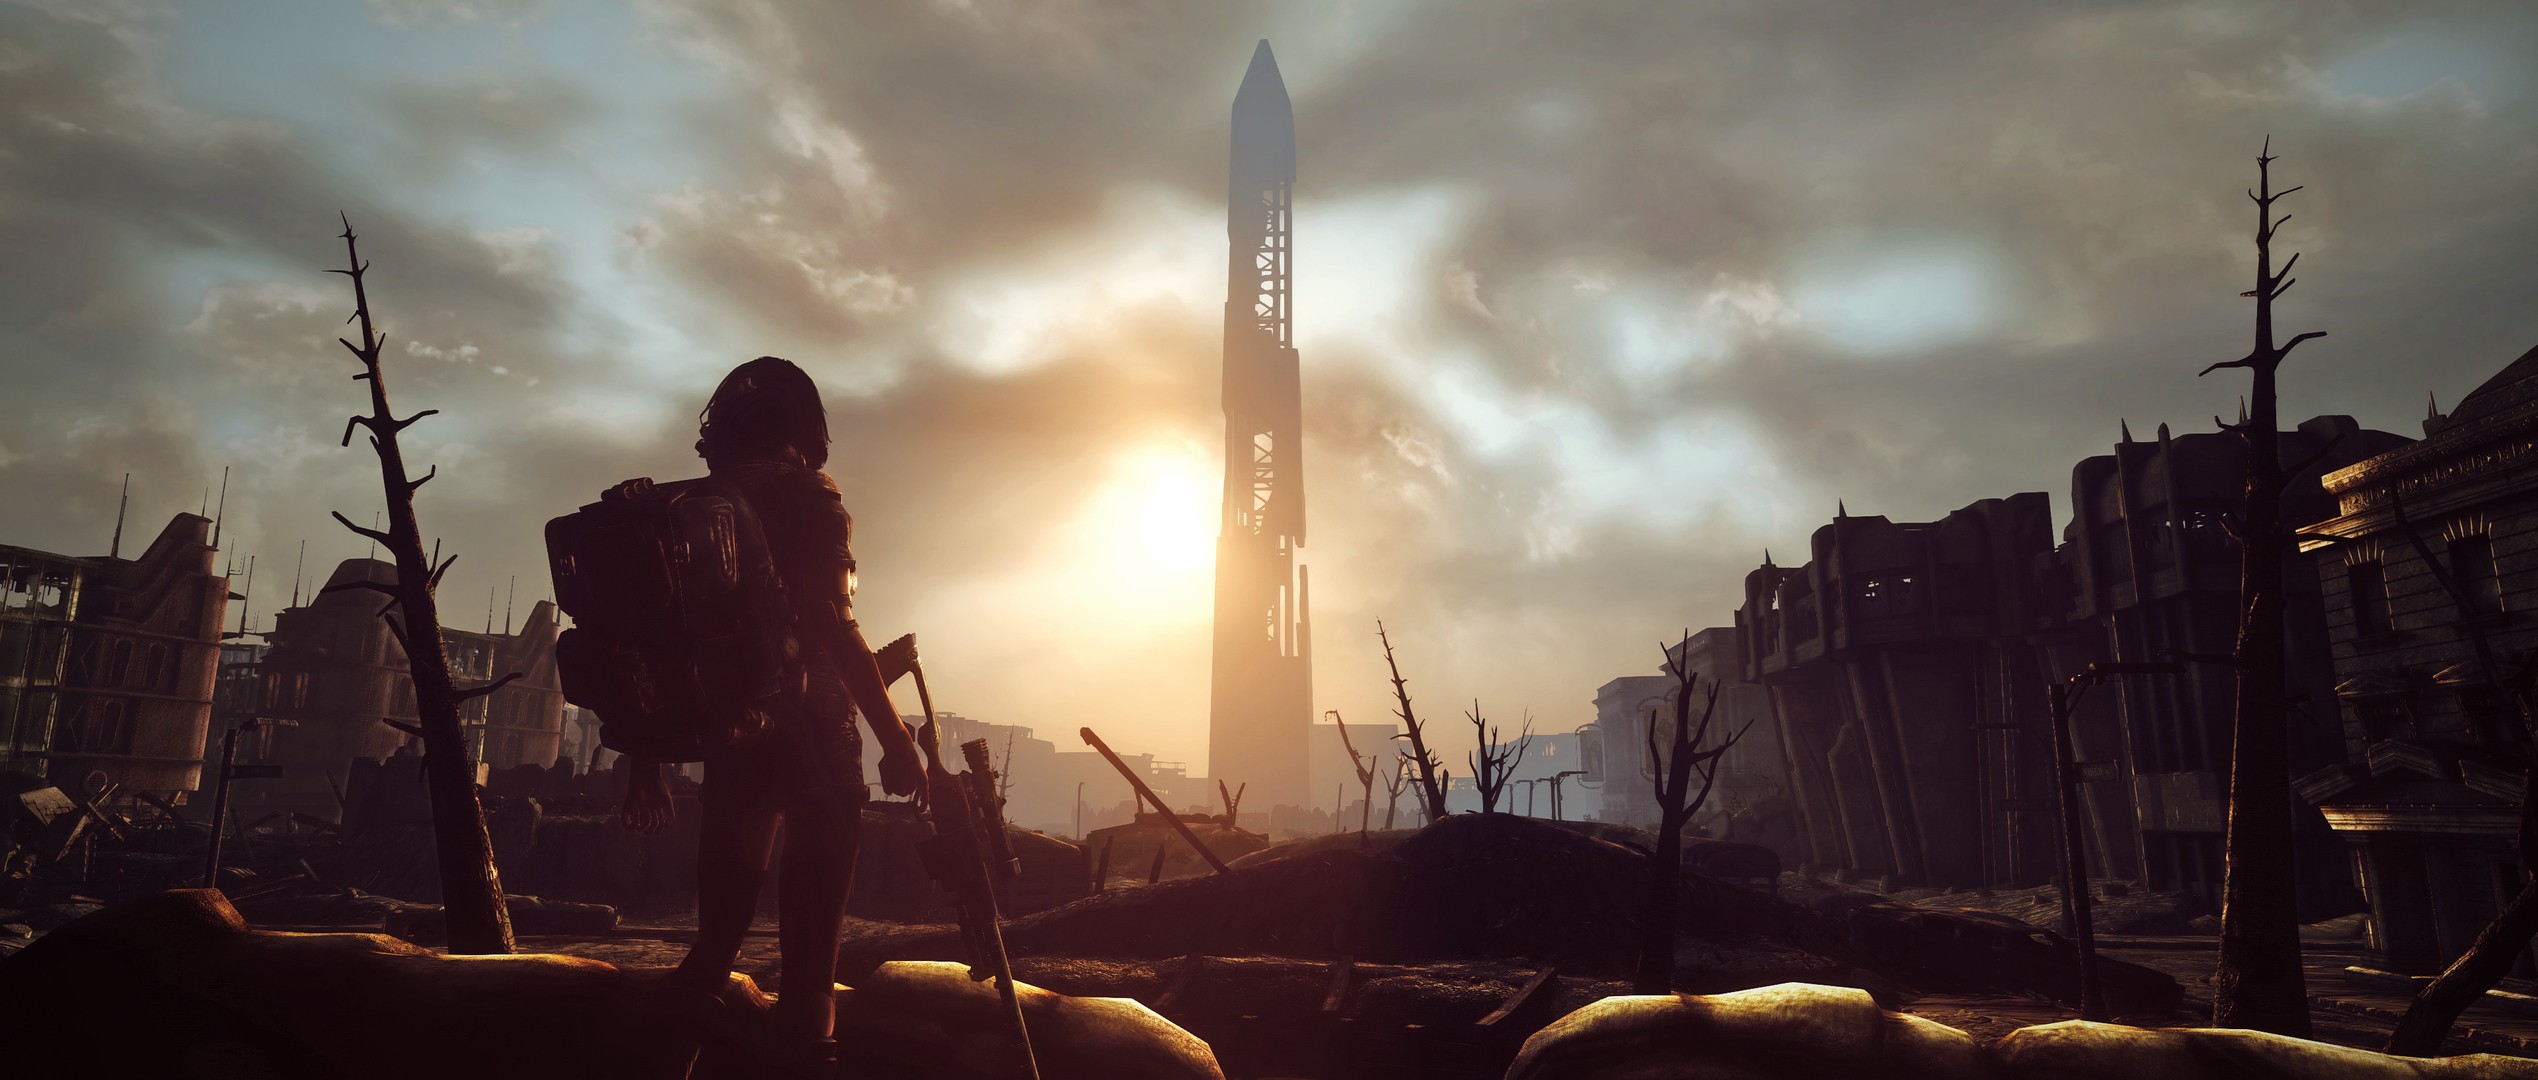 General 2538x1080 Fallout 3 video games PC gaming apocalyptic